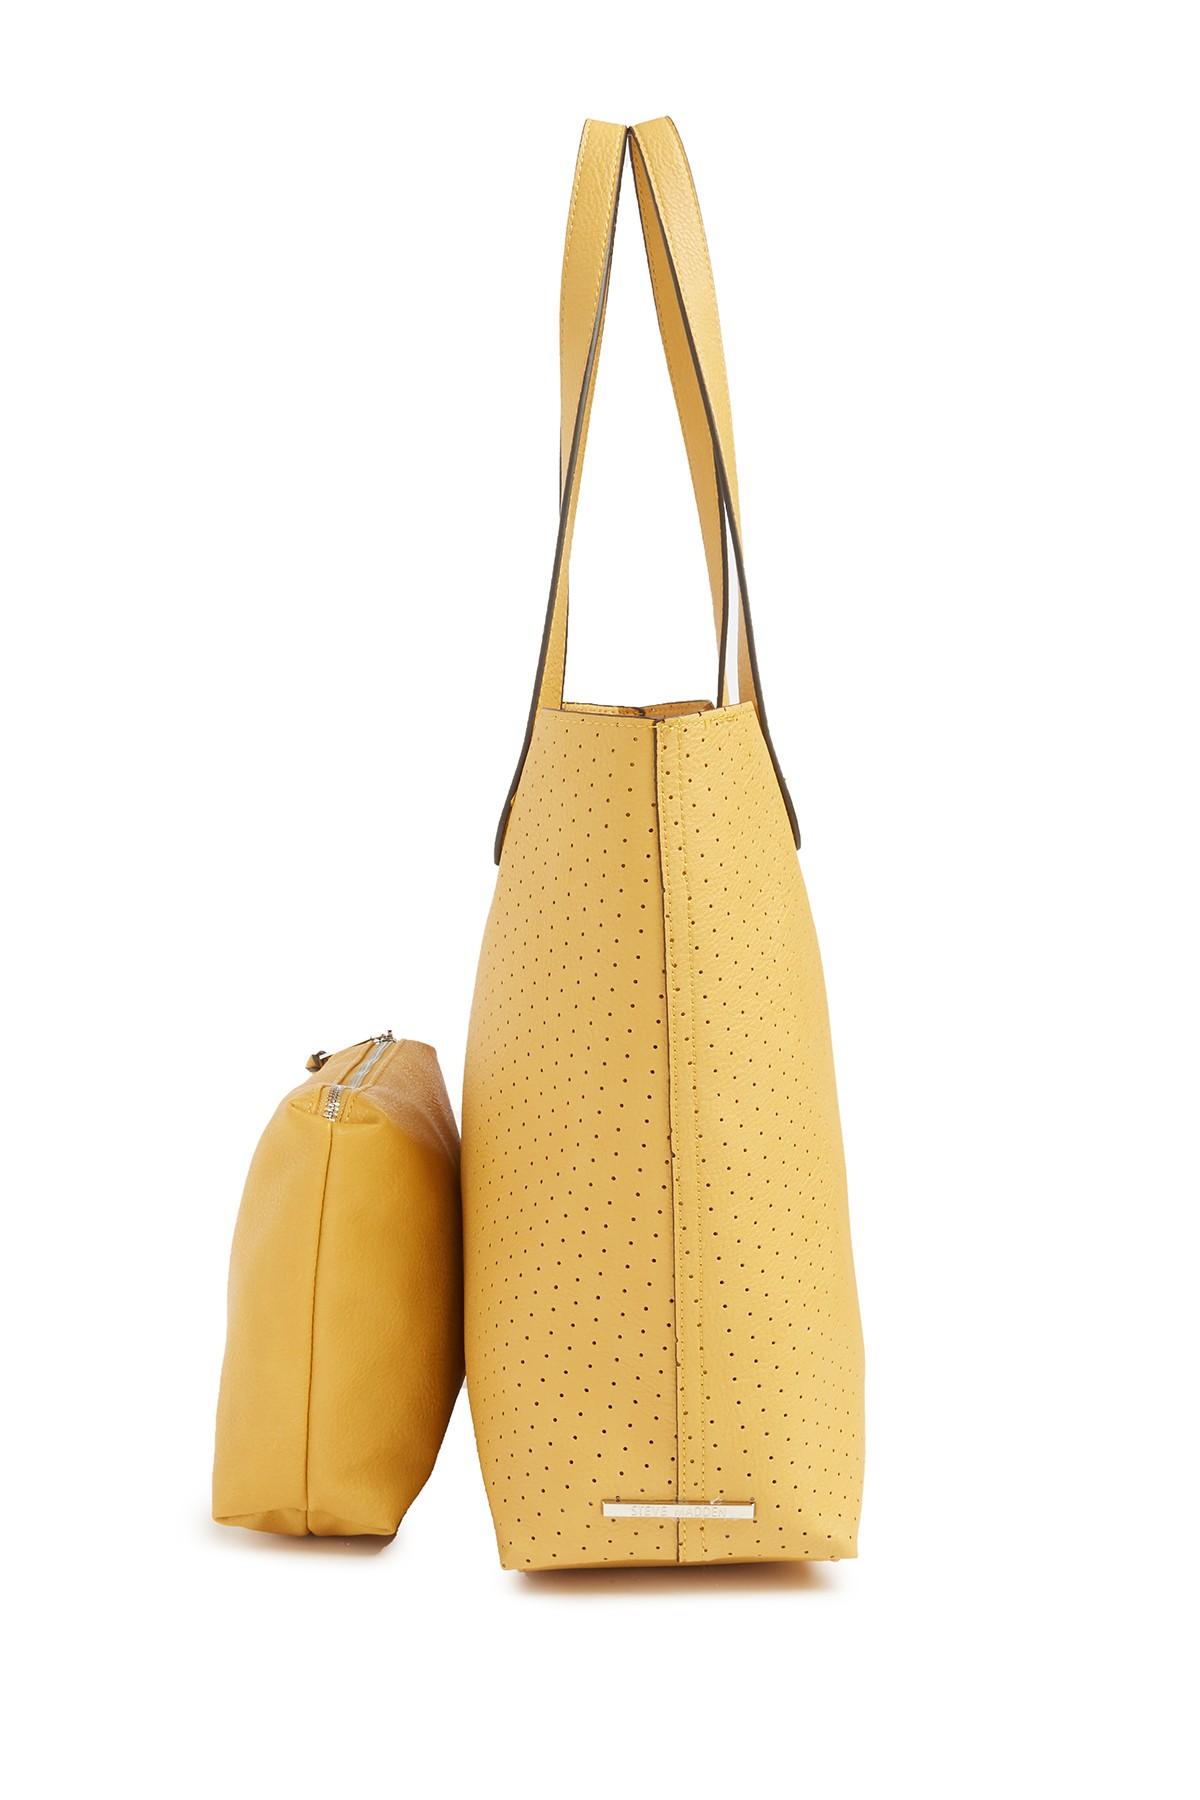 Steve Madden Canvas Tote Bags